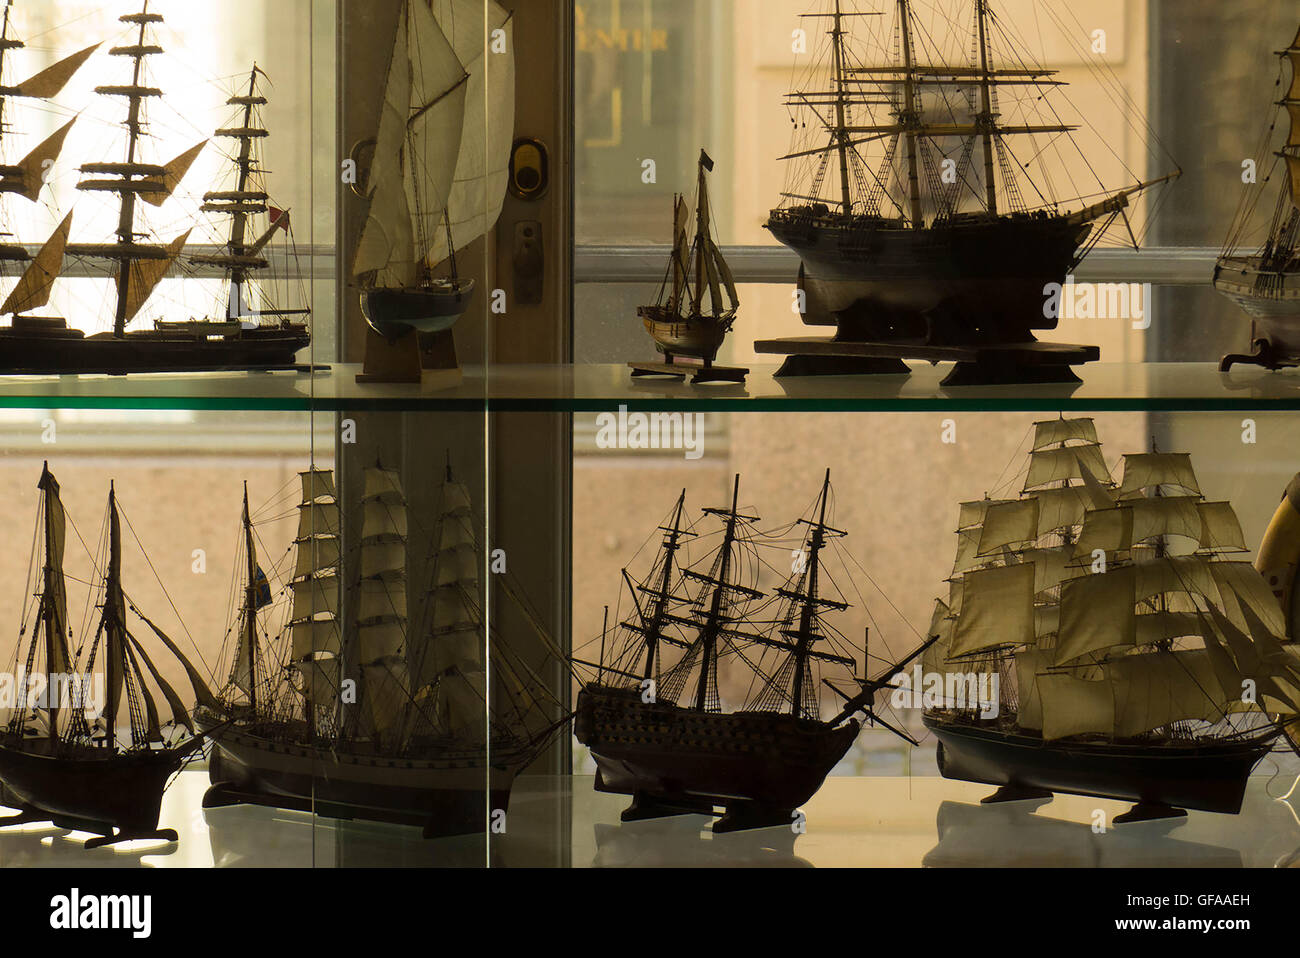 Ship models shown in window display Stockholm,Sweden Stock Photo